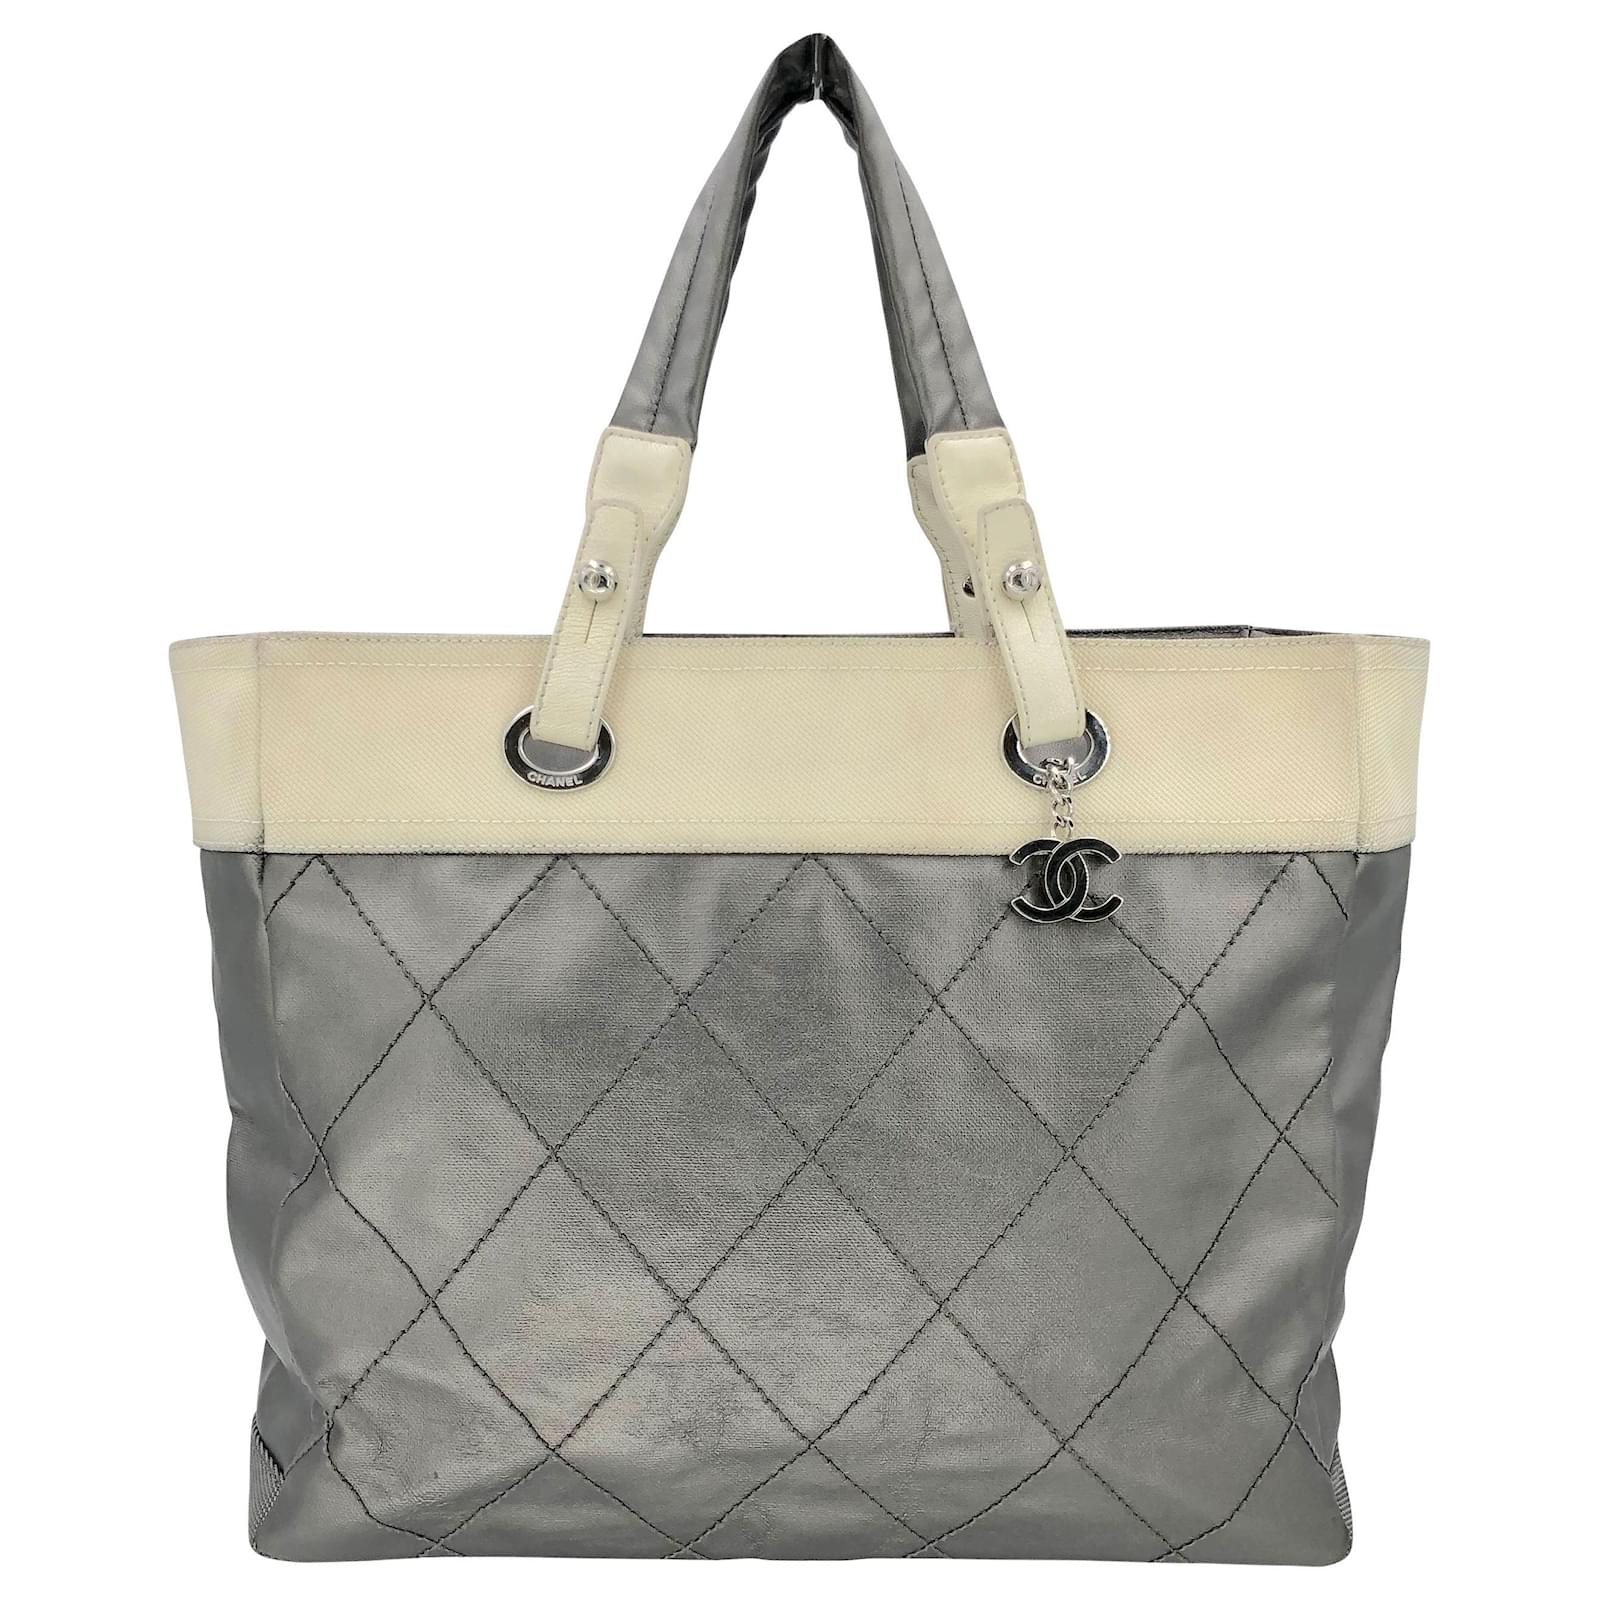 Totes Chanel Chanel 1980s Vintage Tote Bag in Grey Fabric with Charm in Silver-Tone